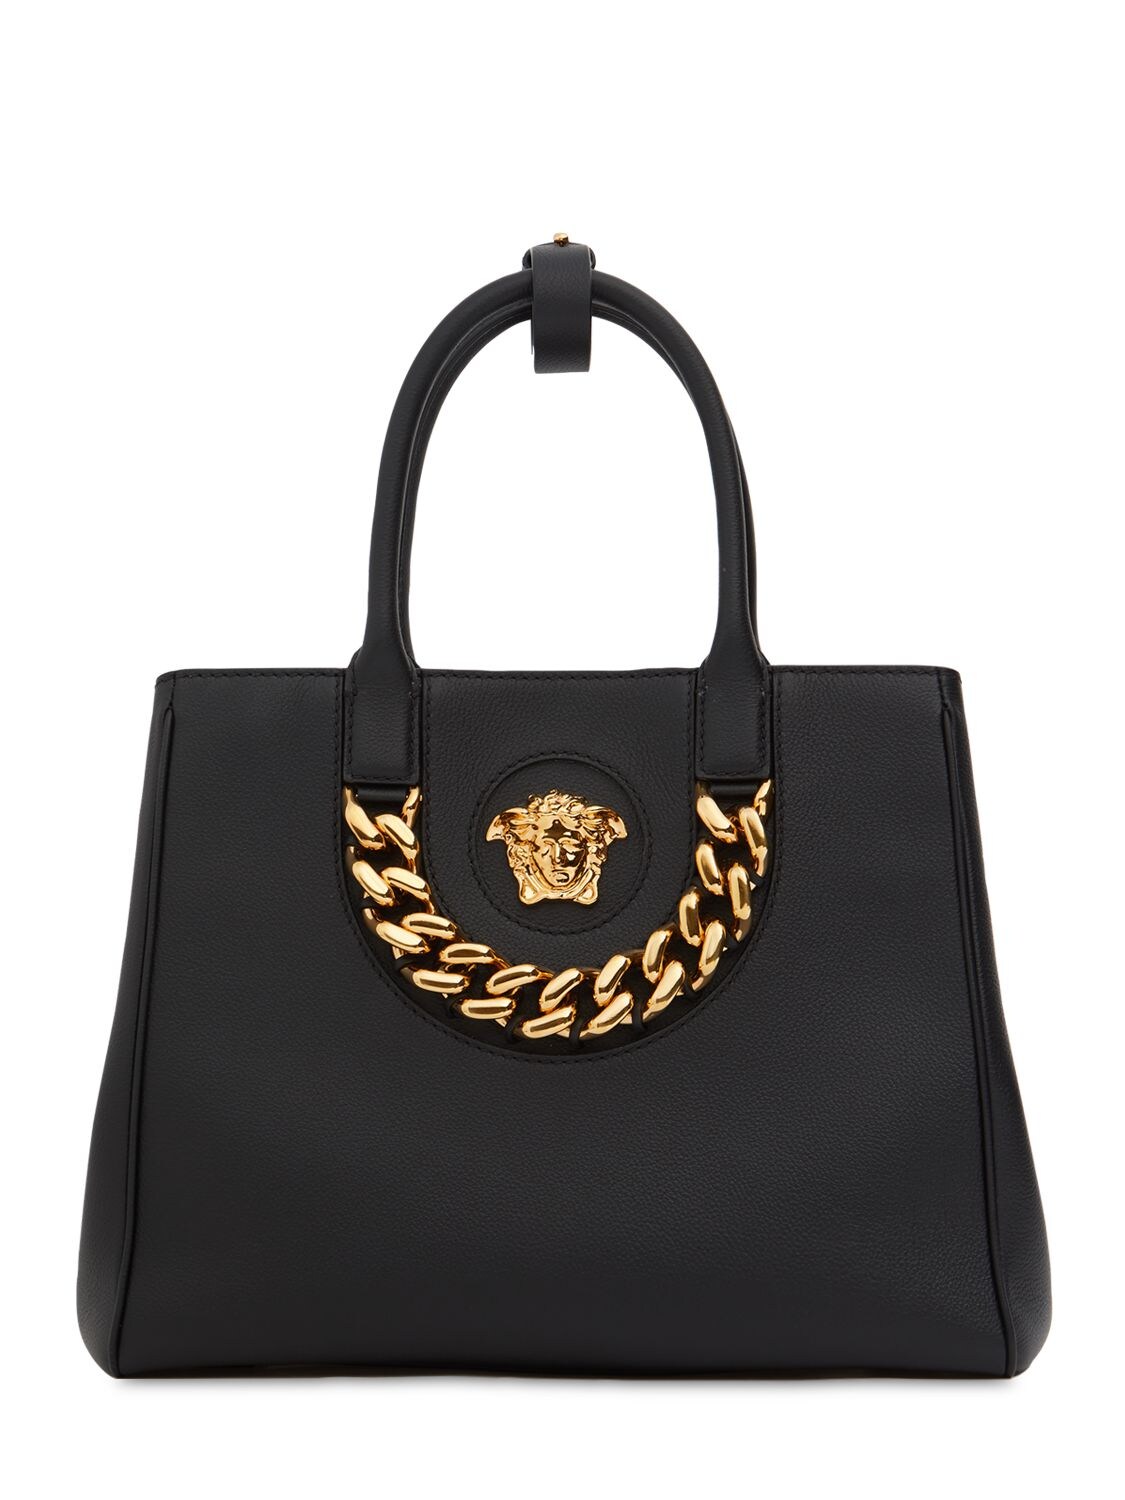 Medusa Leather Tote Bag W/ Gold Chain